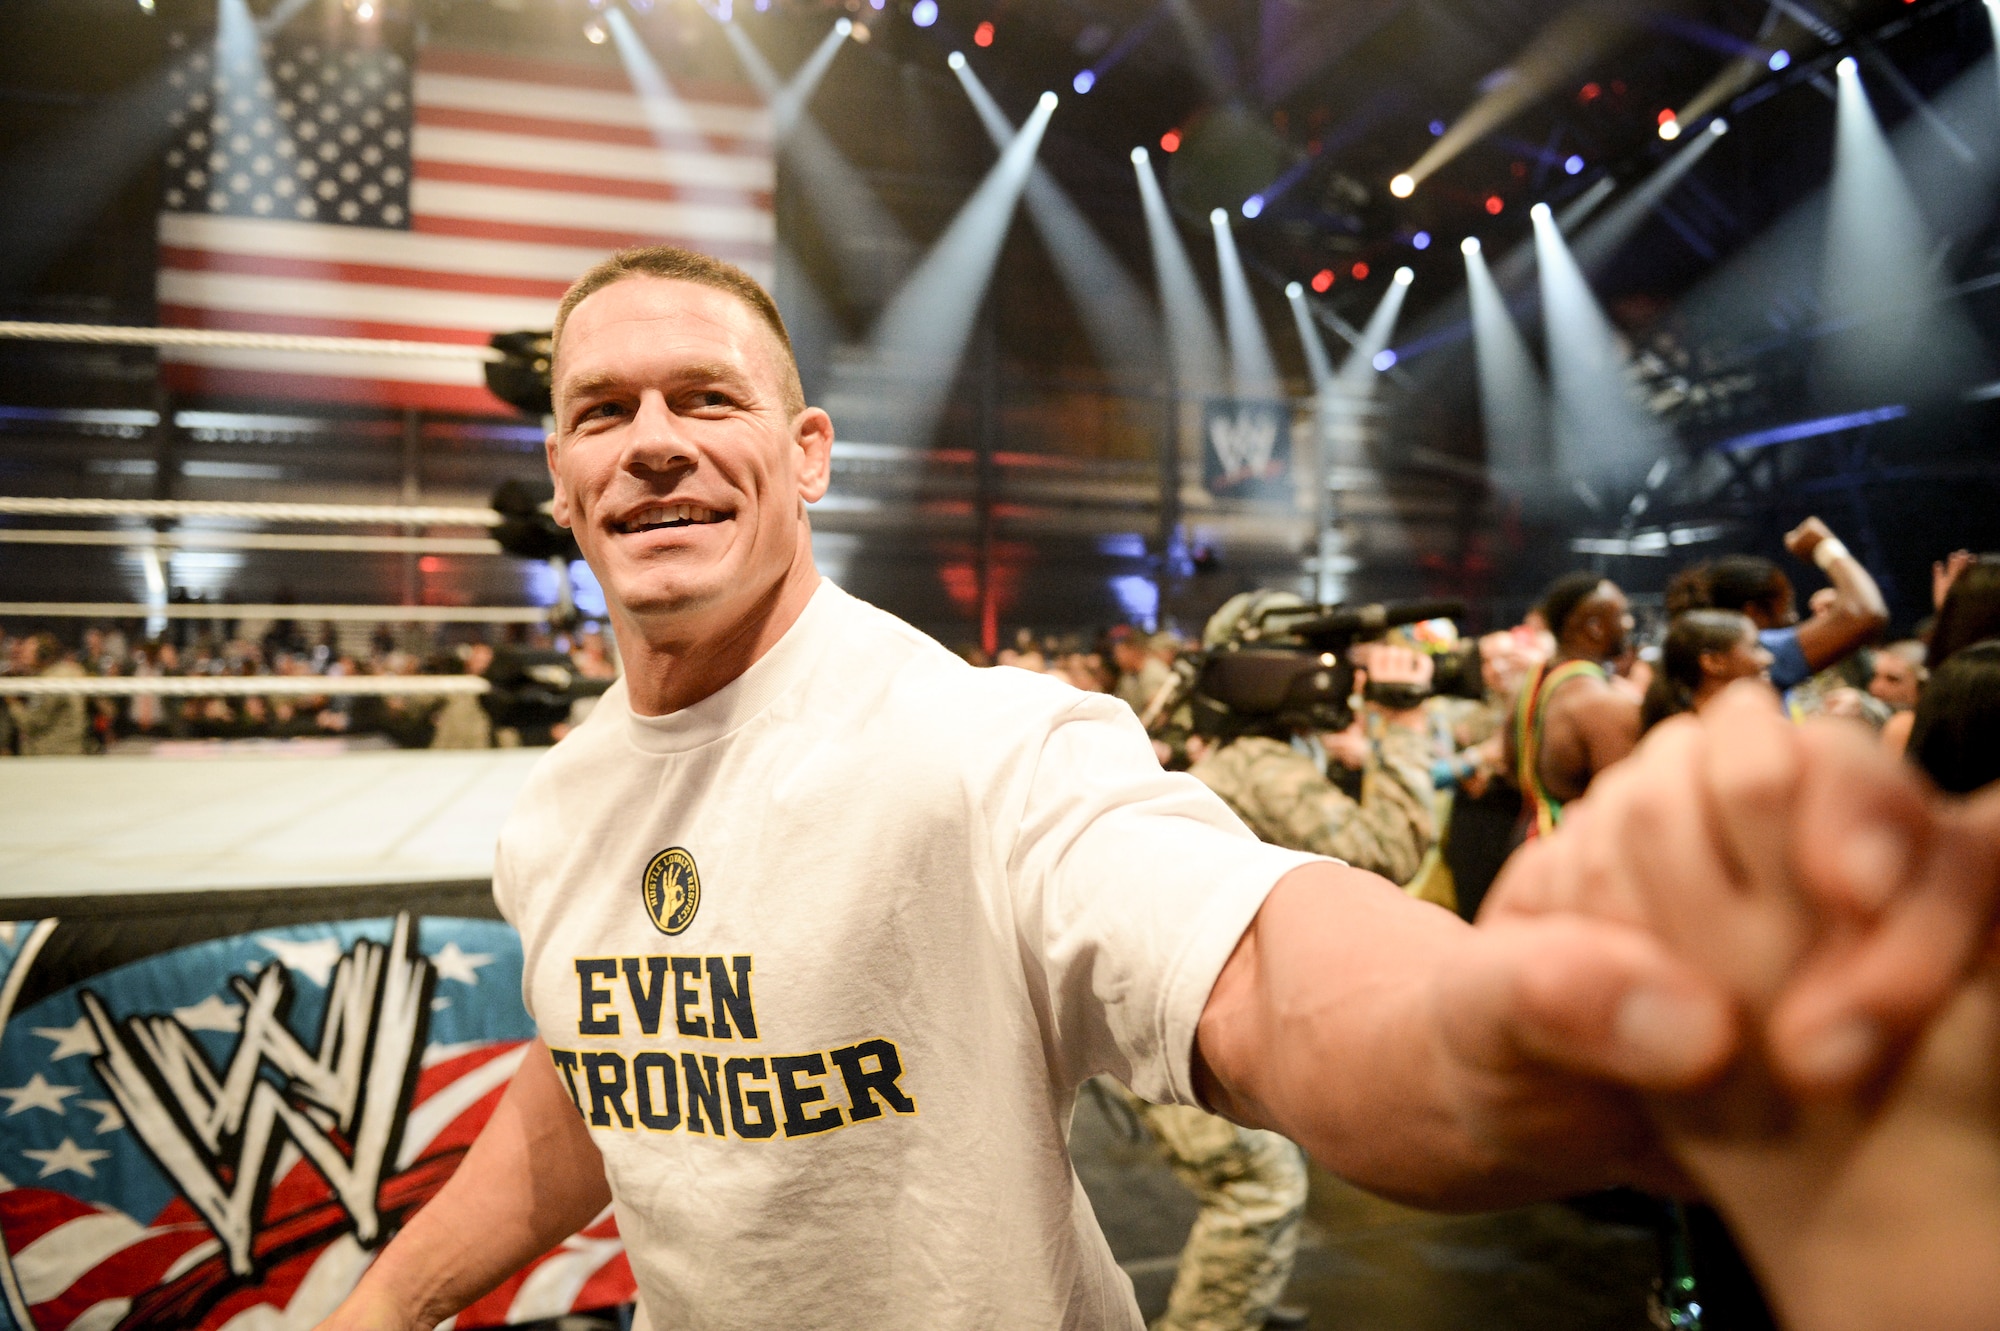 Professional wrestler John Cena shakes hands with a child, Dec. 11, 2013, at the conclusion of the WWE Tribute to the Troops event at Joint Base Lewis-McChord, Wash. The event entertained approximately 4,000 service members and family members stationed throughout  the Puget Sound area. (U.S. Air Force photo/Tech. Sgt. Sean Tobin)